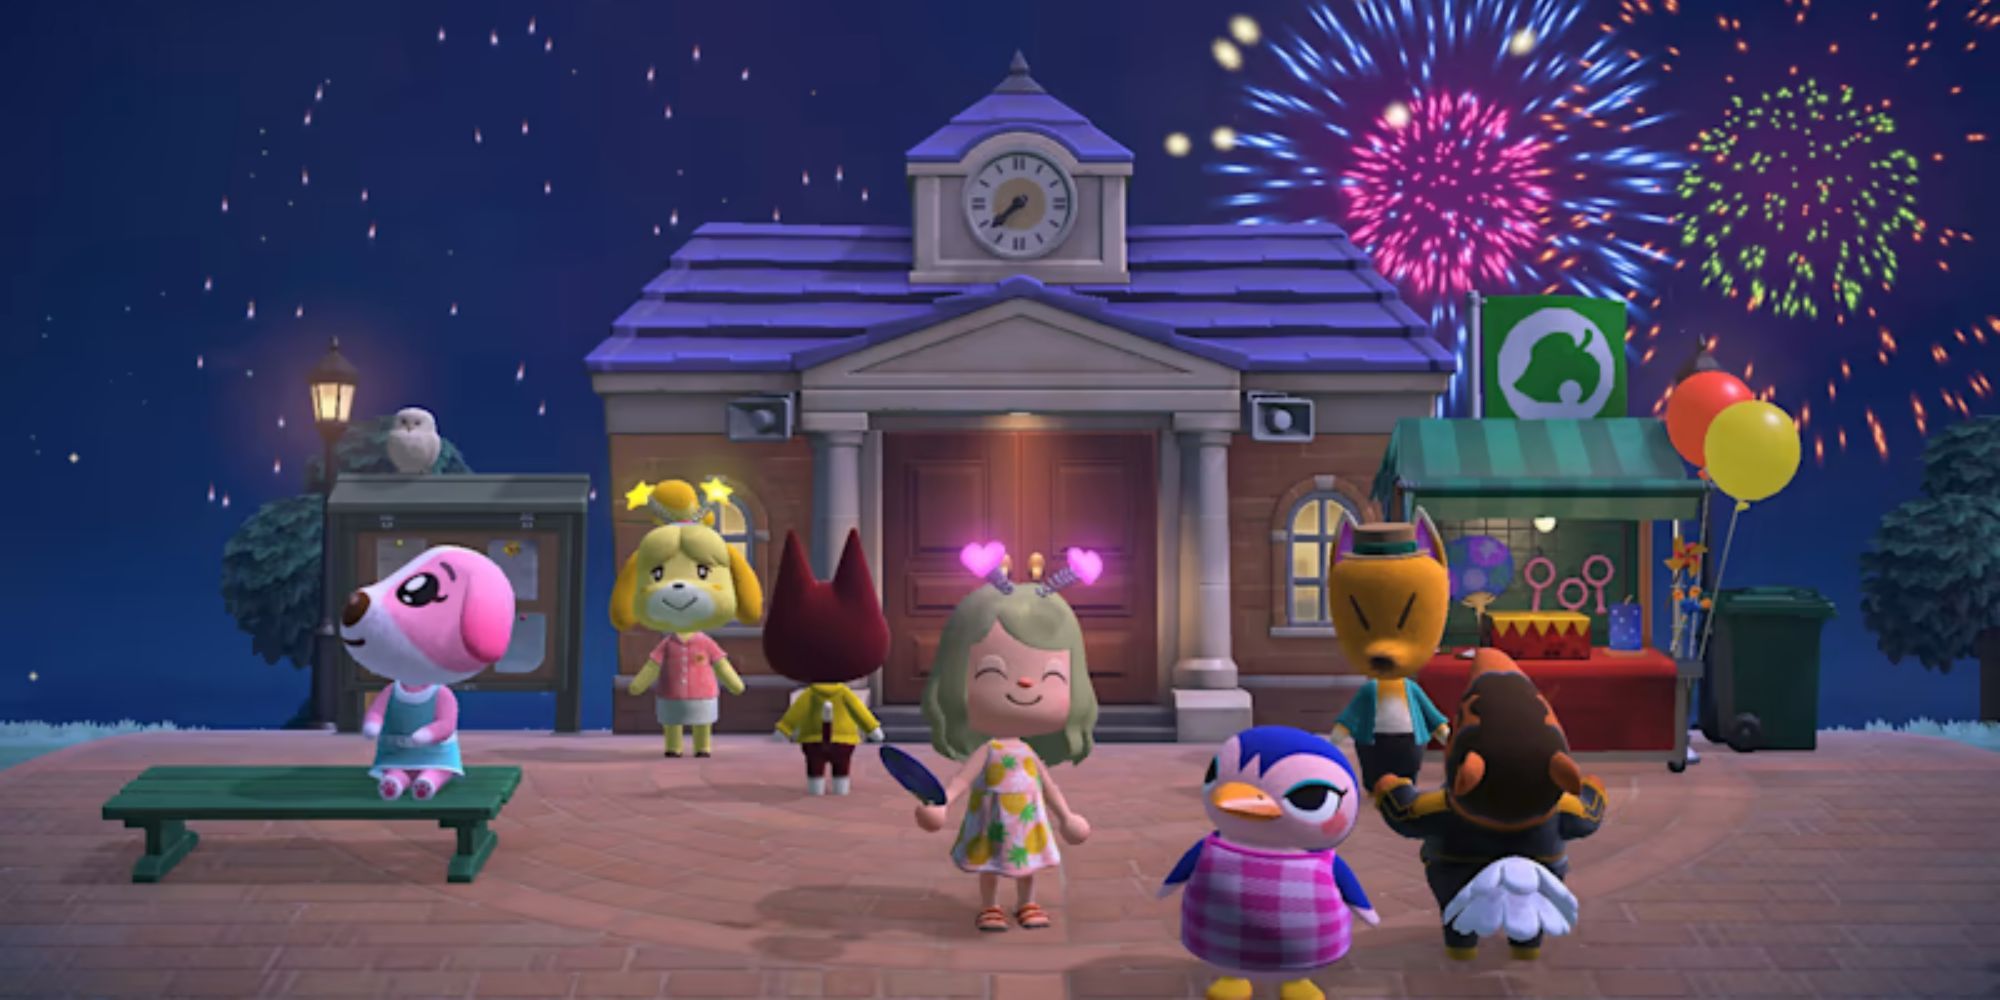 A group of villagers gather in the square as fireworks explode in the sky